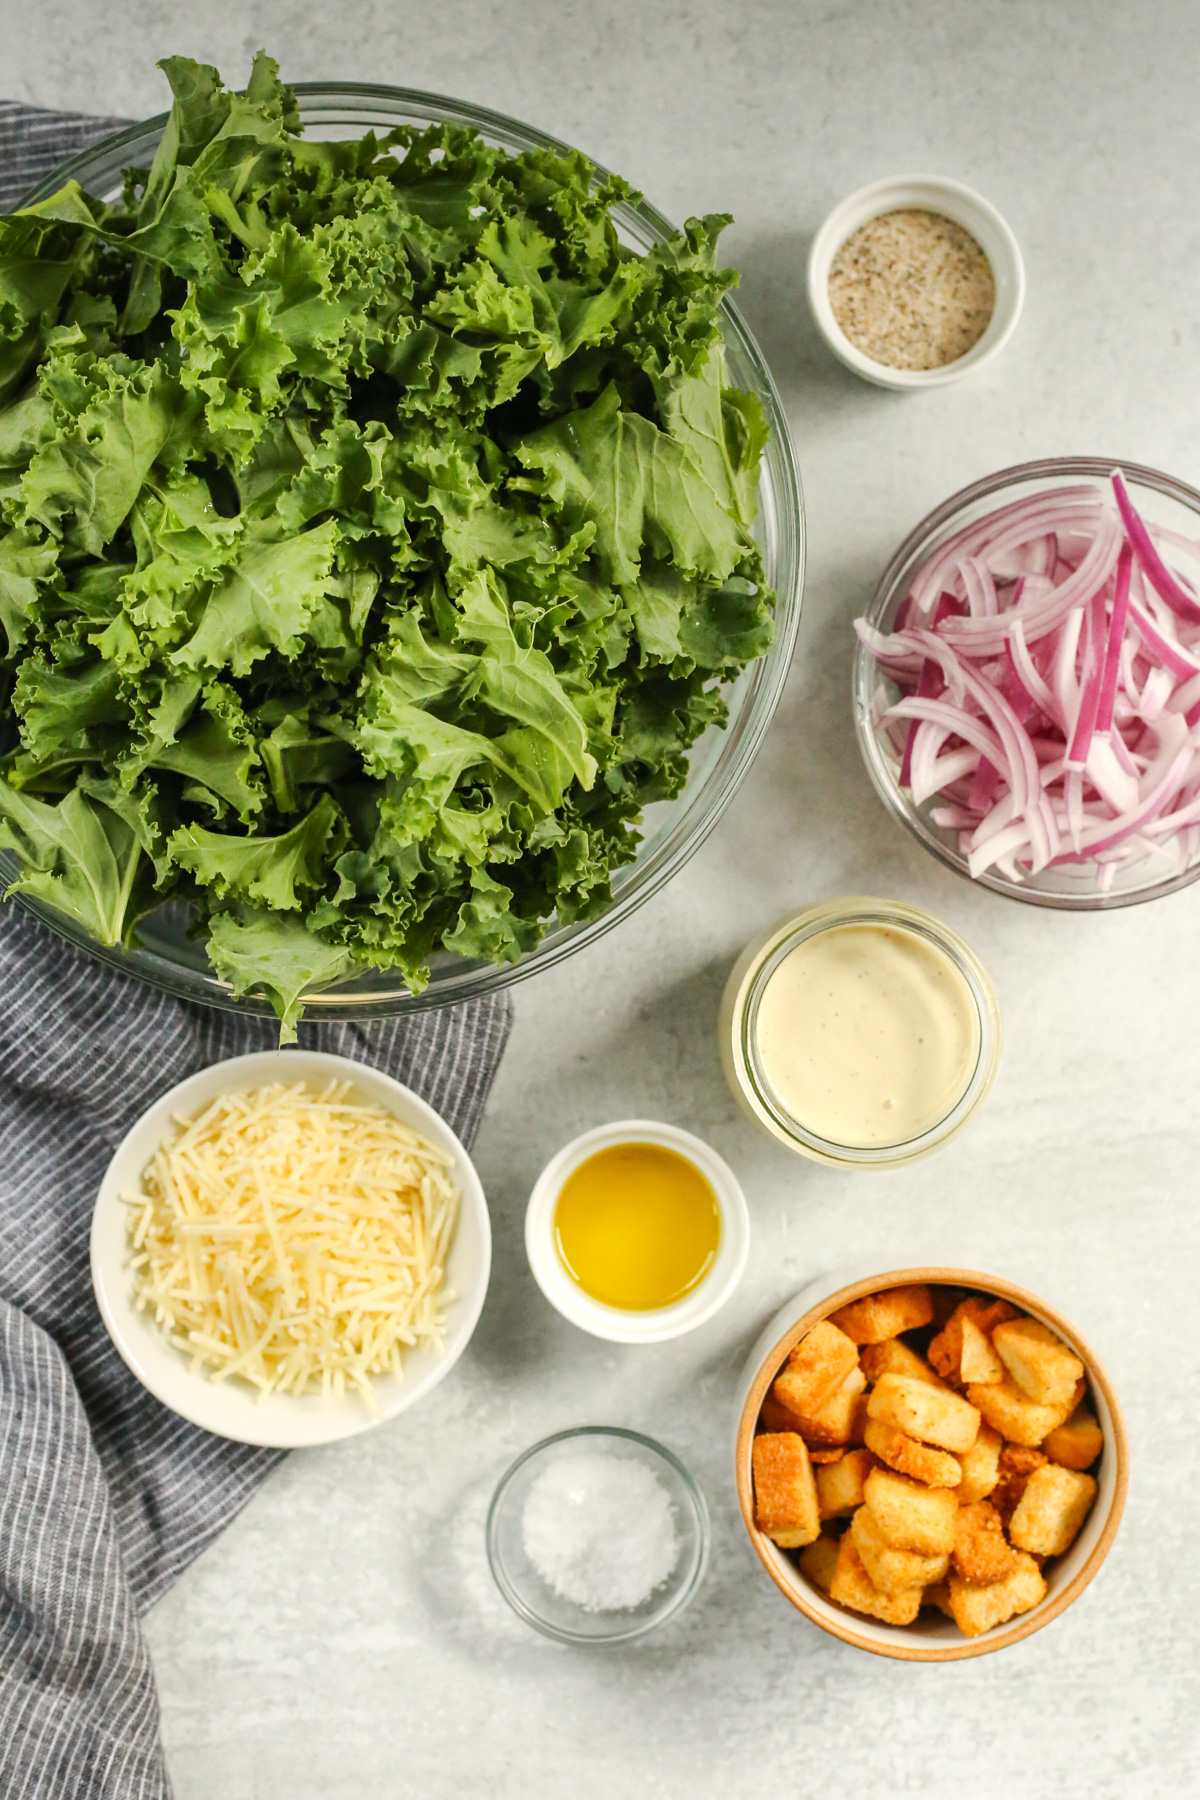 Overhead view of a kitchen countertop displaying the ingredients needed to make a kale caesar salad, including a large bowl of raw kale leaves, plus sliced red onion, Caesar salad dressing, parmesan cheese, and golden brown croutons in small prep bowls nearby